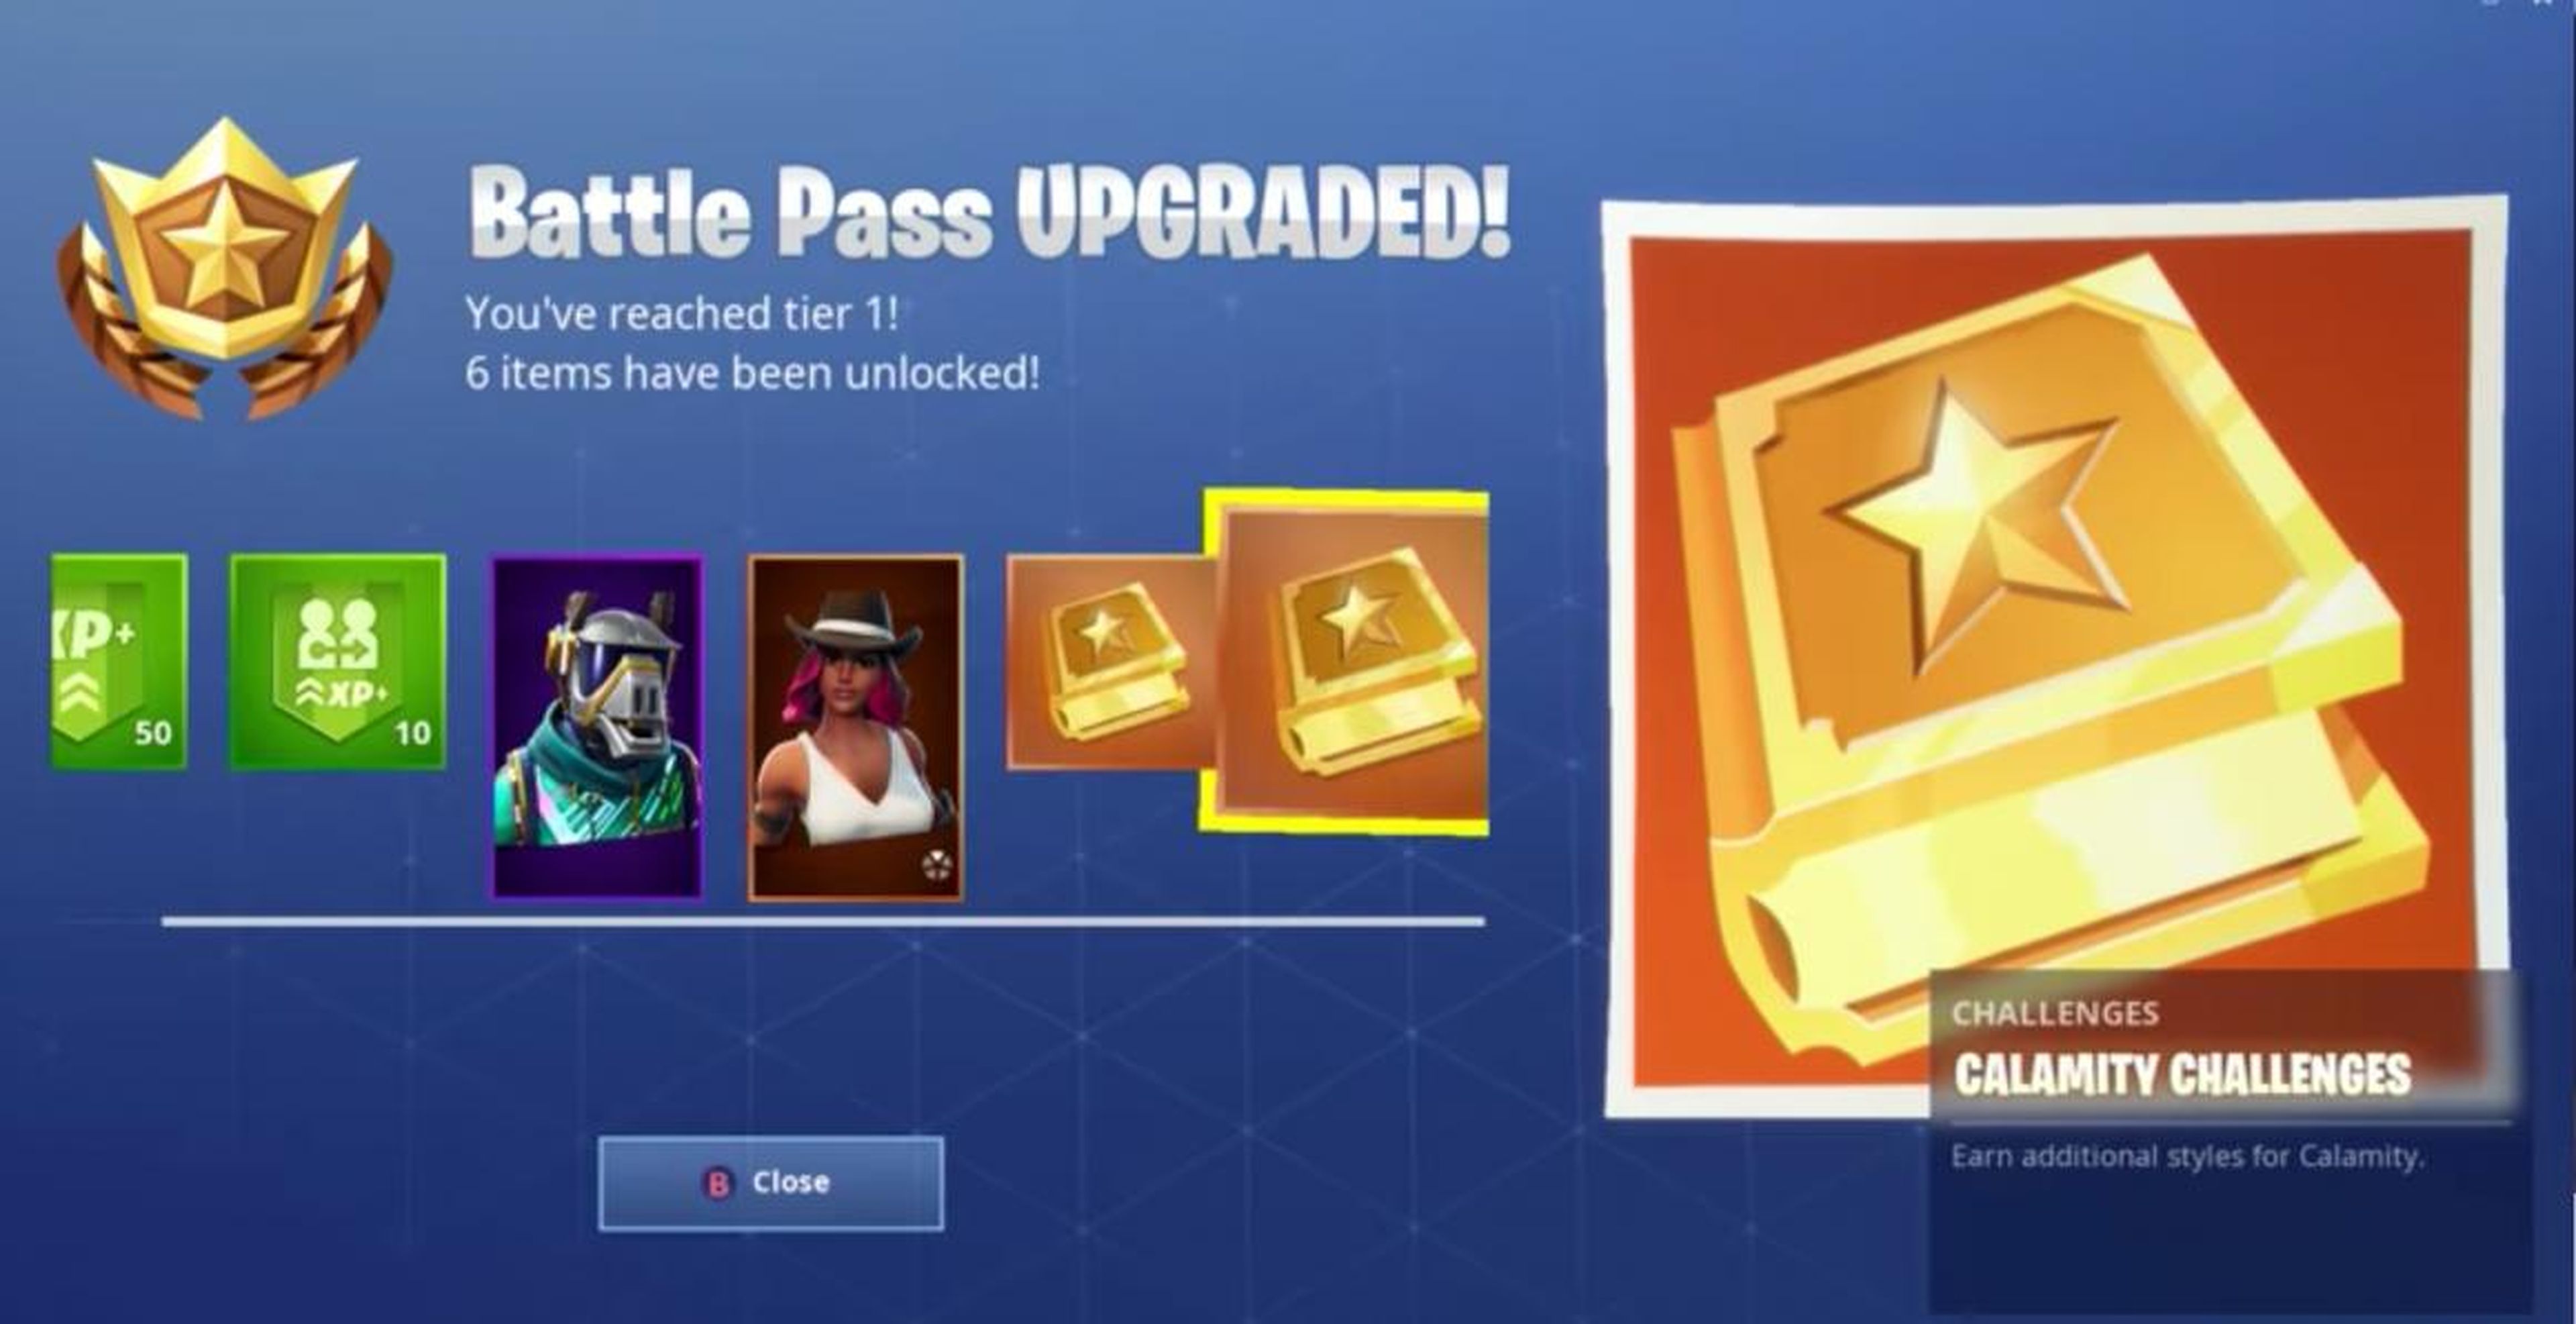 The Season 6 battle pass is the key to new content